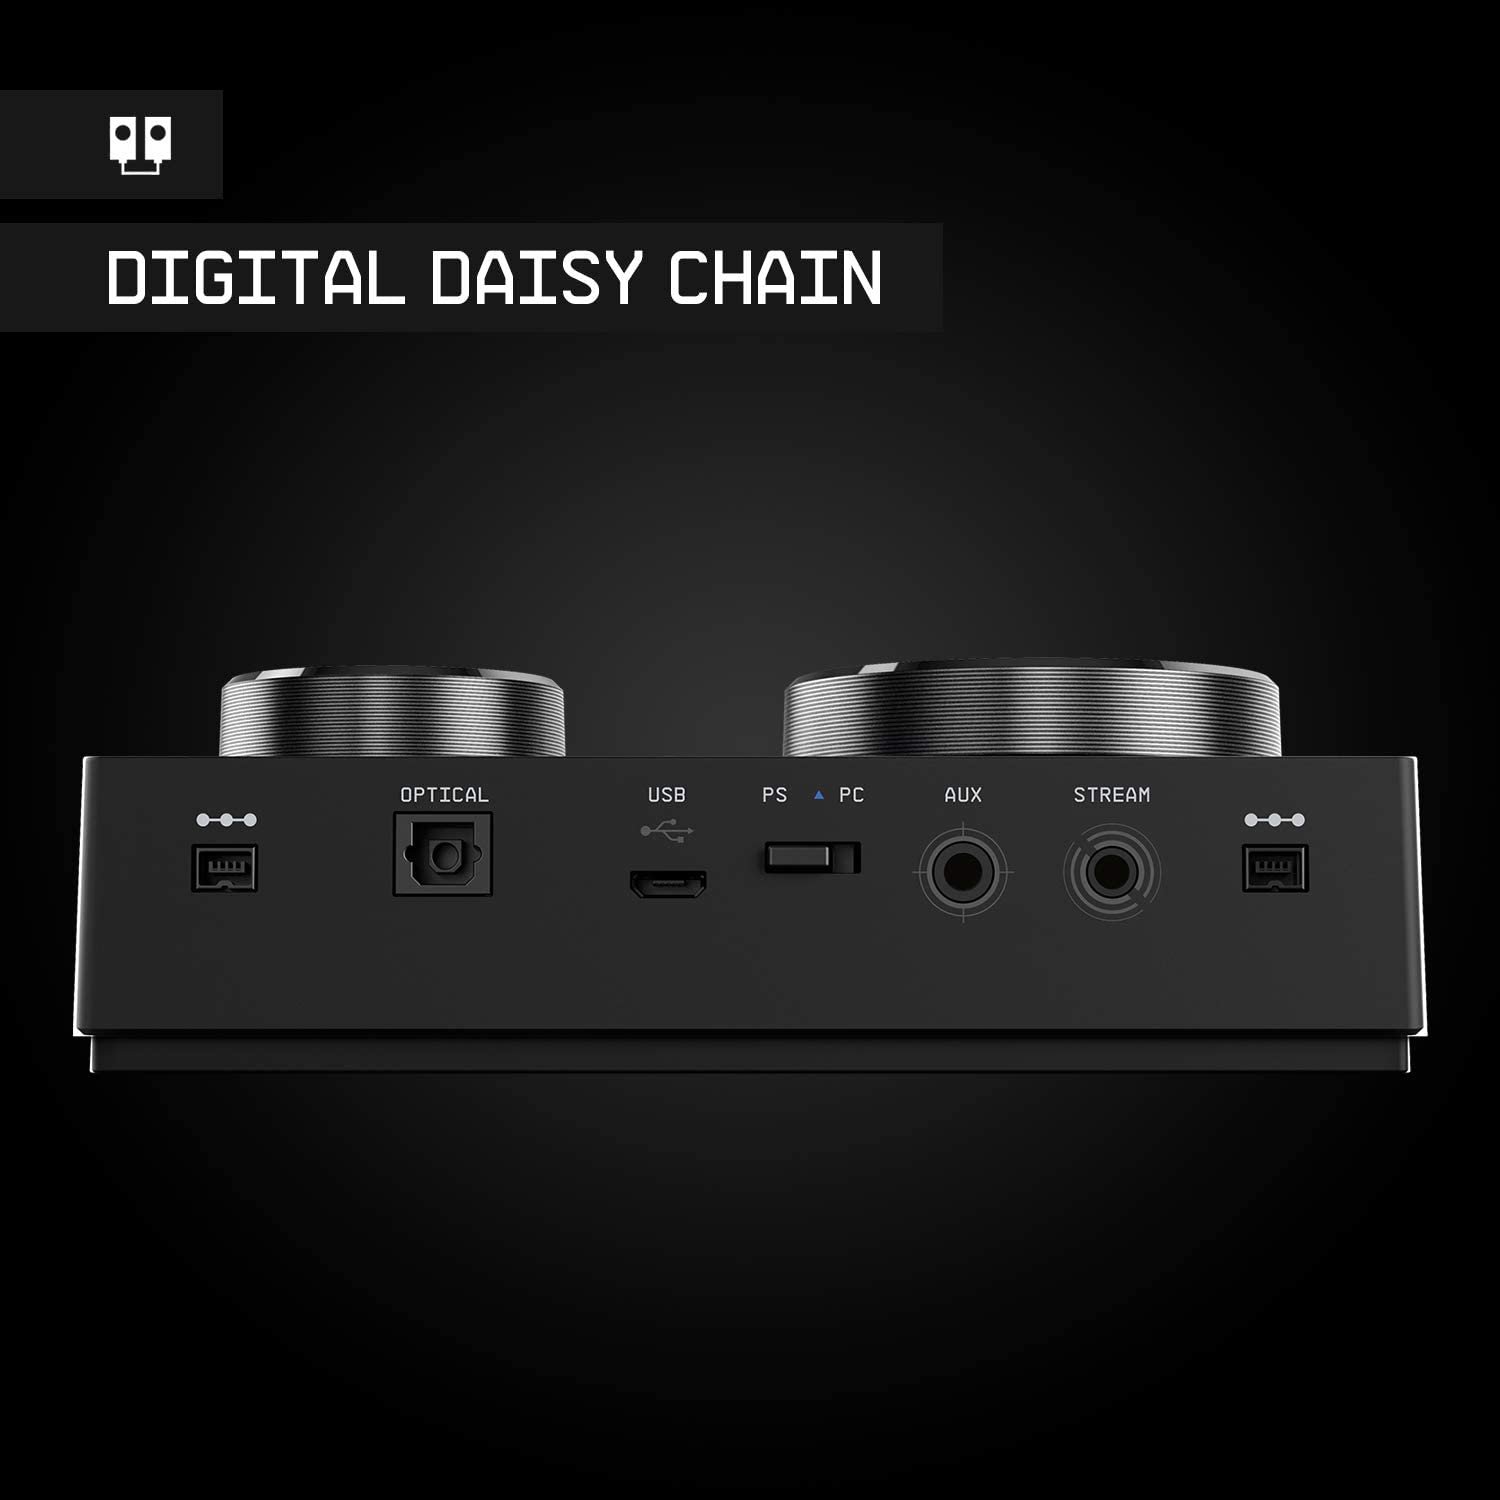 Astro Gaming MixAmp Pro TR Gaming Headset Amplifier, Dolby Audio, USB Sound Card Functionality, Digital Daisy Chain